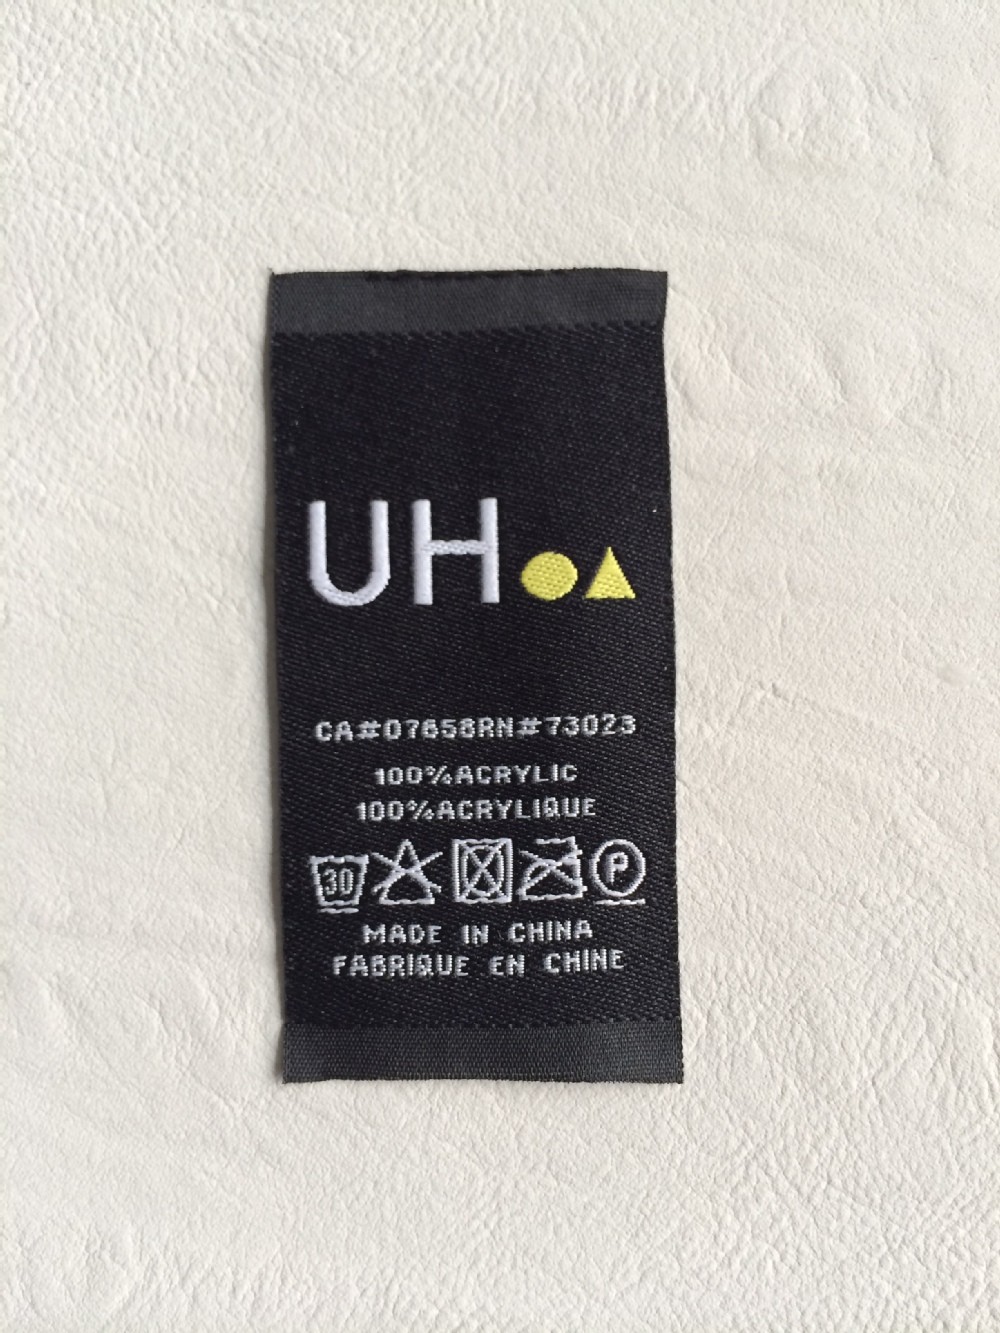 Custom size,care,and content woven labels